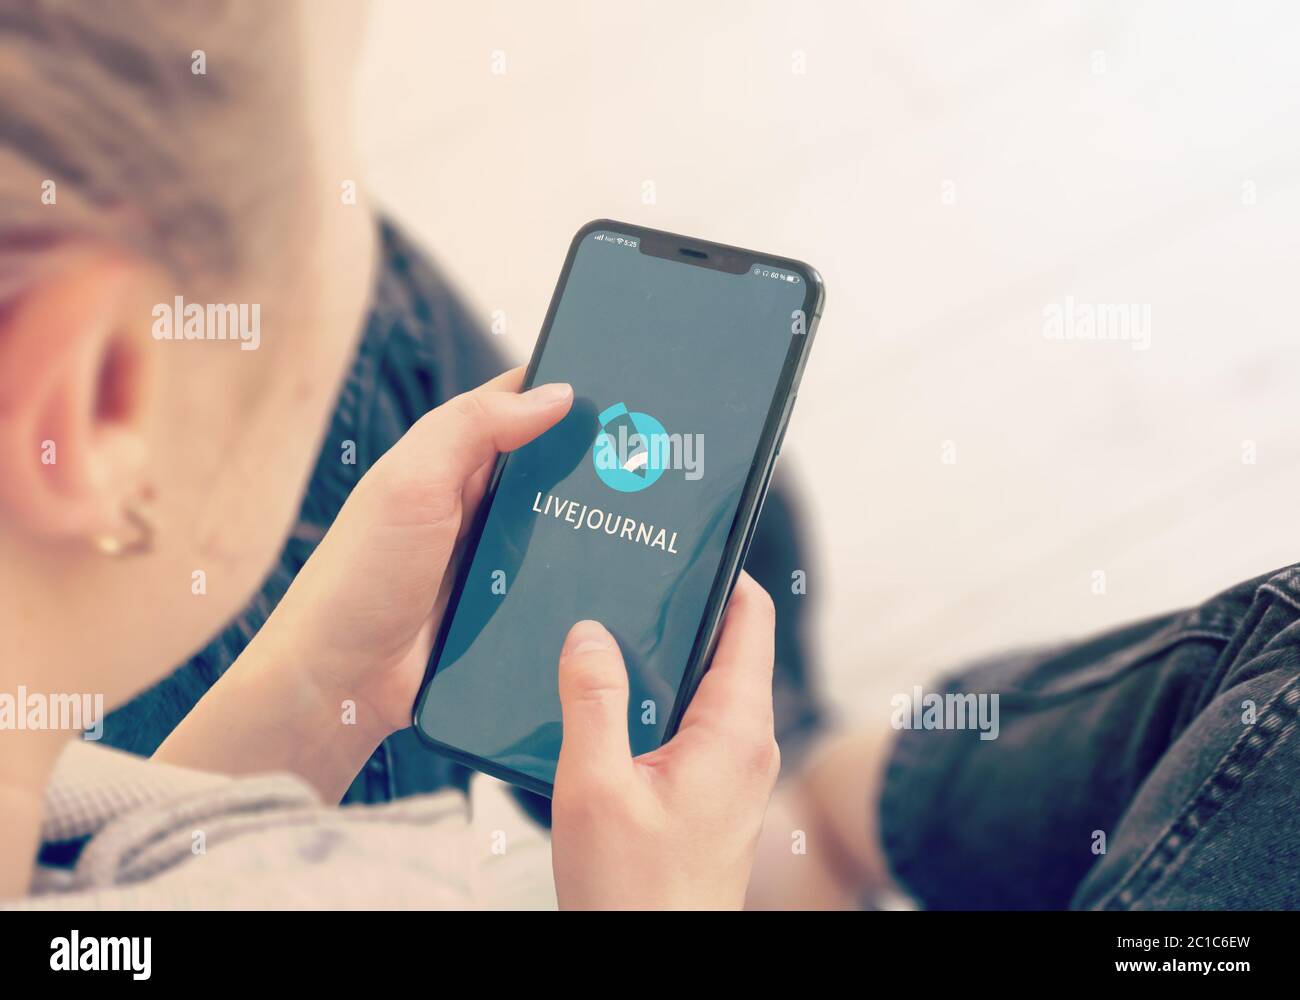 KYIV, UKRAINE-JANUARY, 2020: Livejournal on Mobile Phone Screen. Young Girl Pointing or Texting Livejournal on Smartphone During a Pandemic Self-Isolation and Coronavirus Prevention. Stock Photo